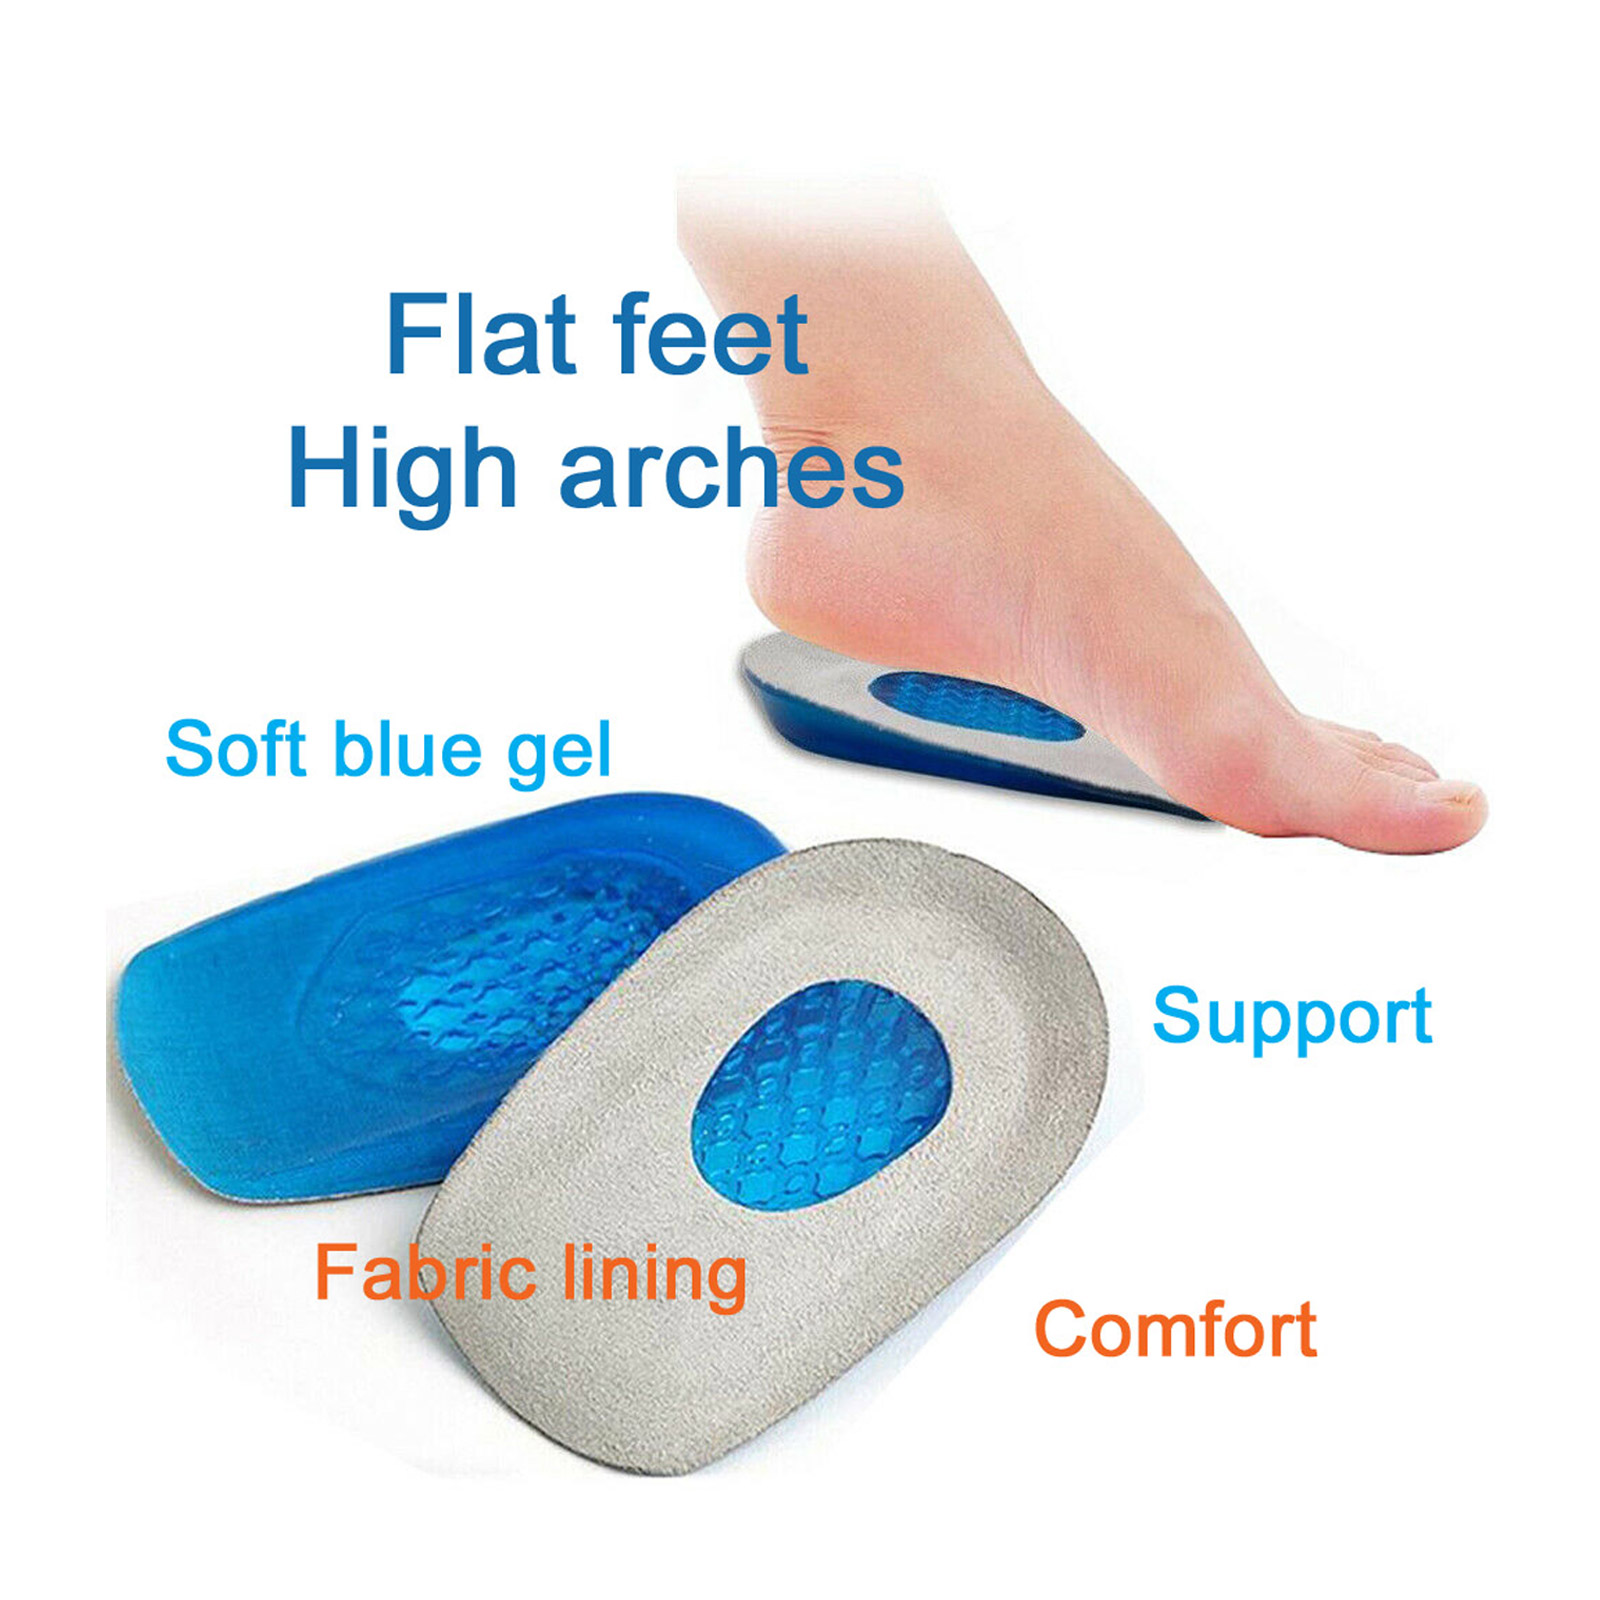 orthotic heel cup showing foot position